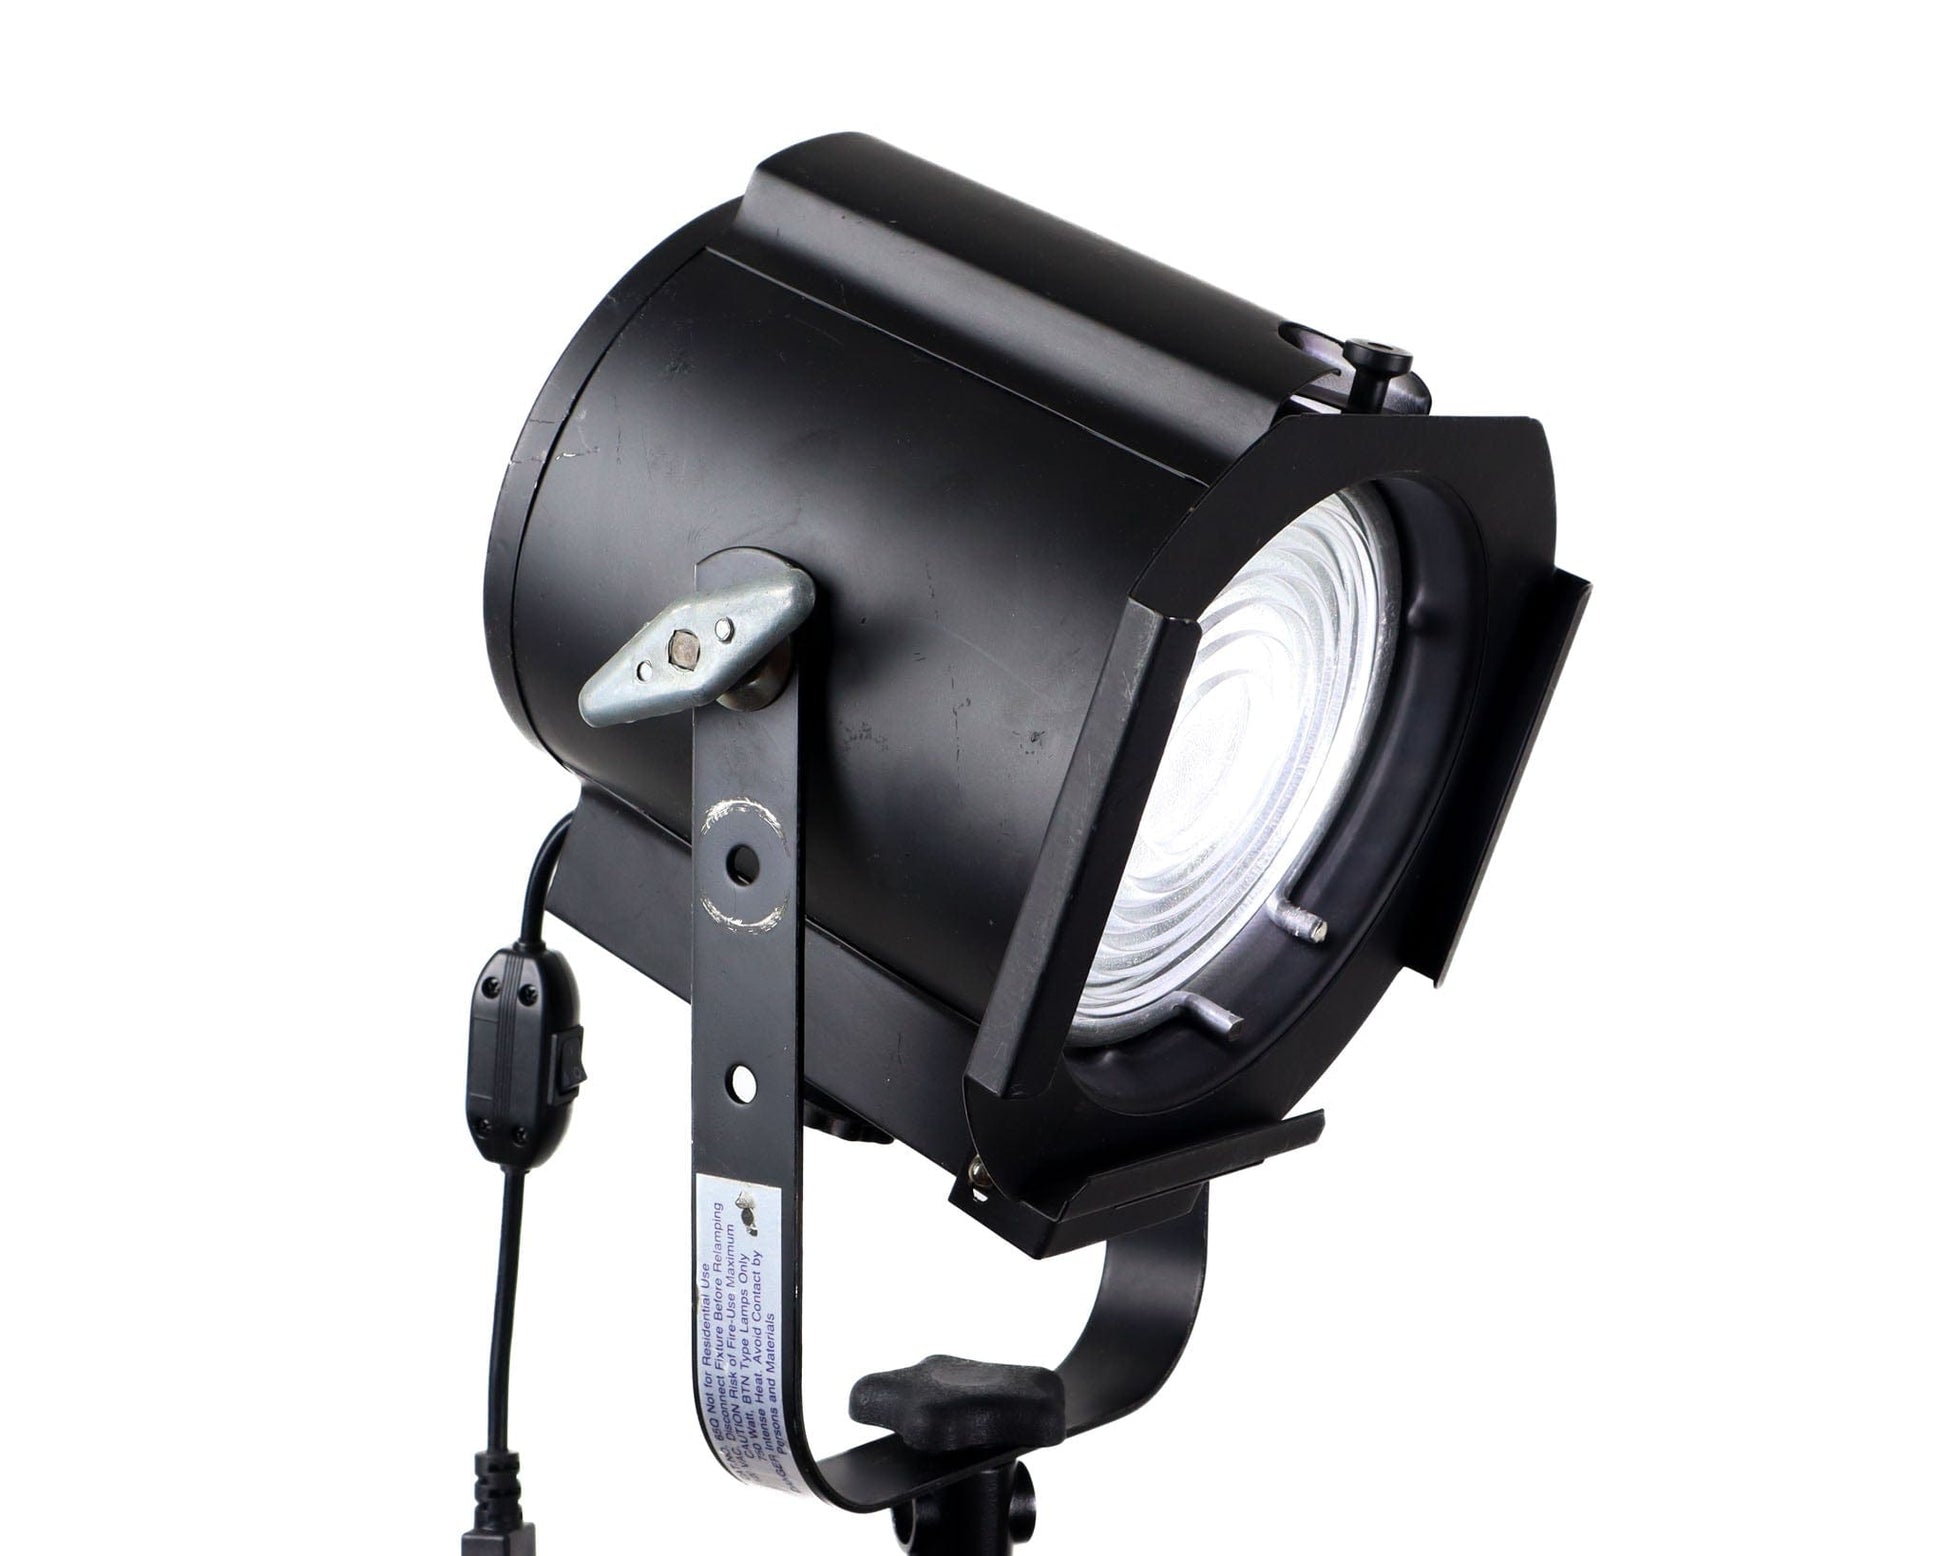 LightAndTimeArt Flood & Spot Lights Small, Black Stage light with Colored Lenses, Home Theater & Movie Room Decor